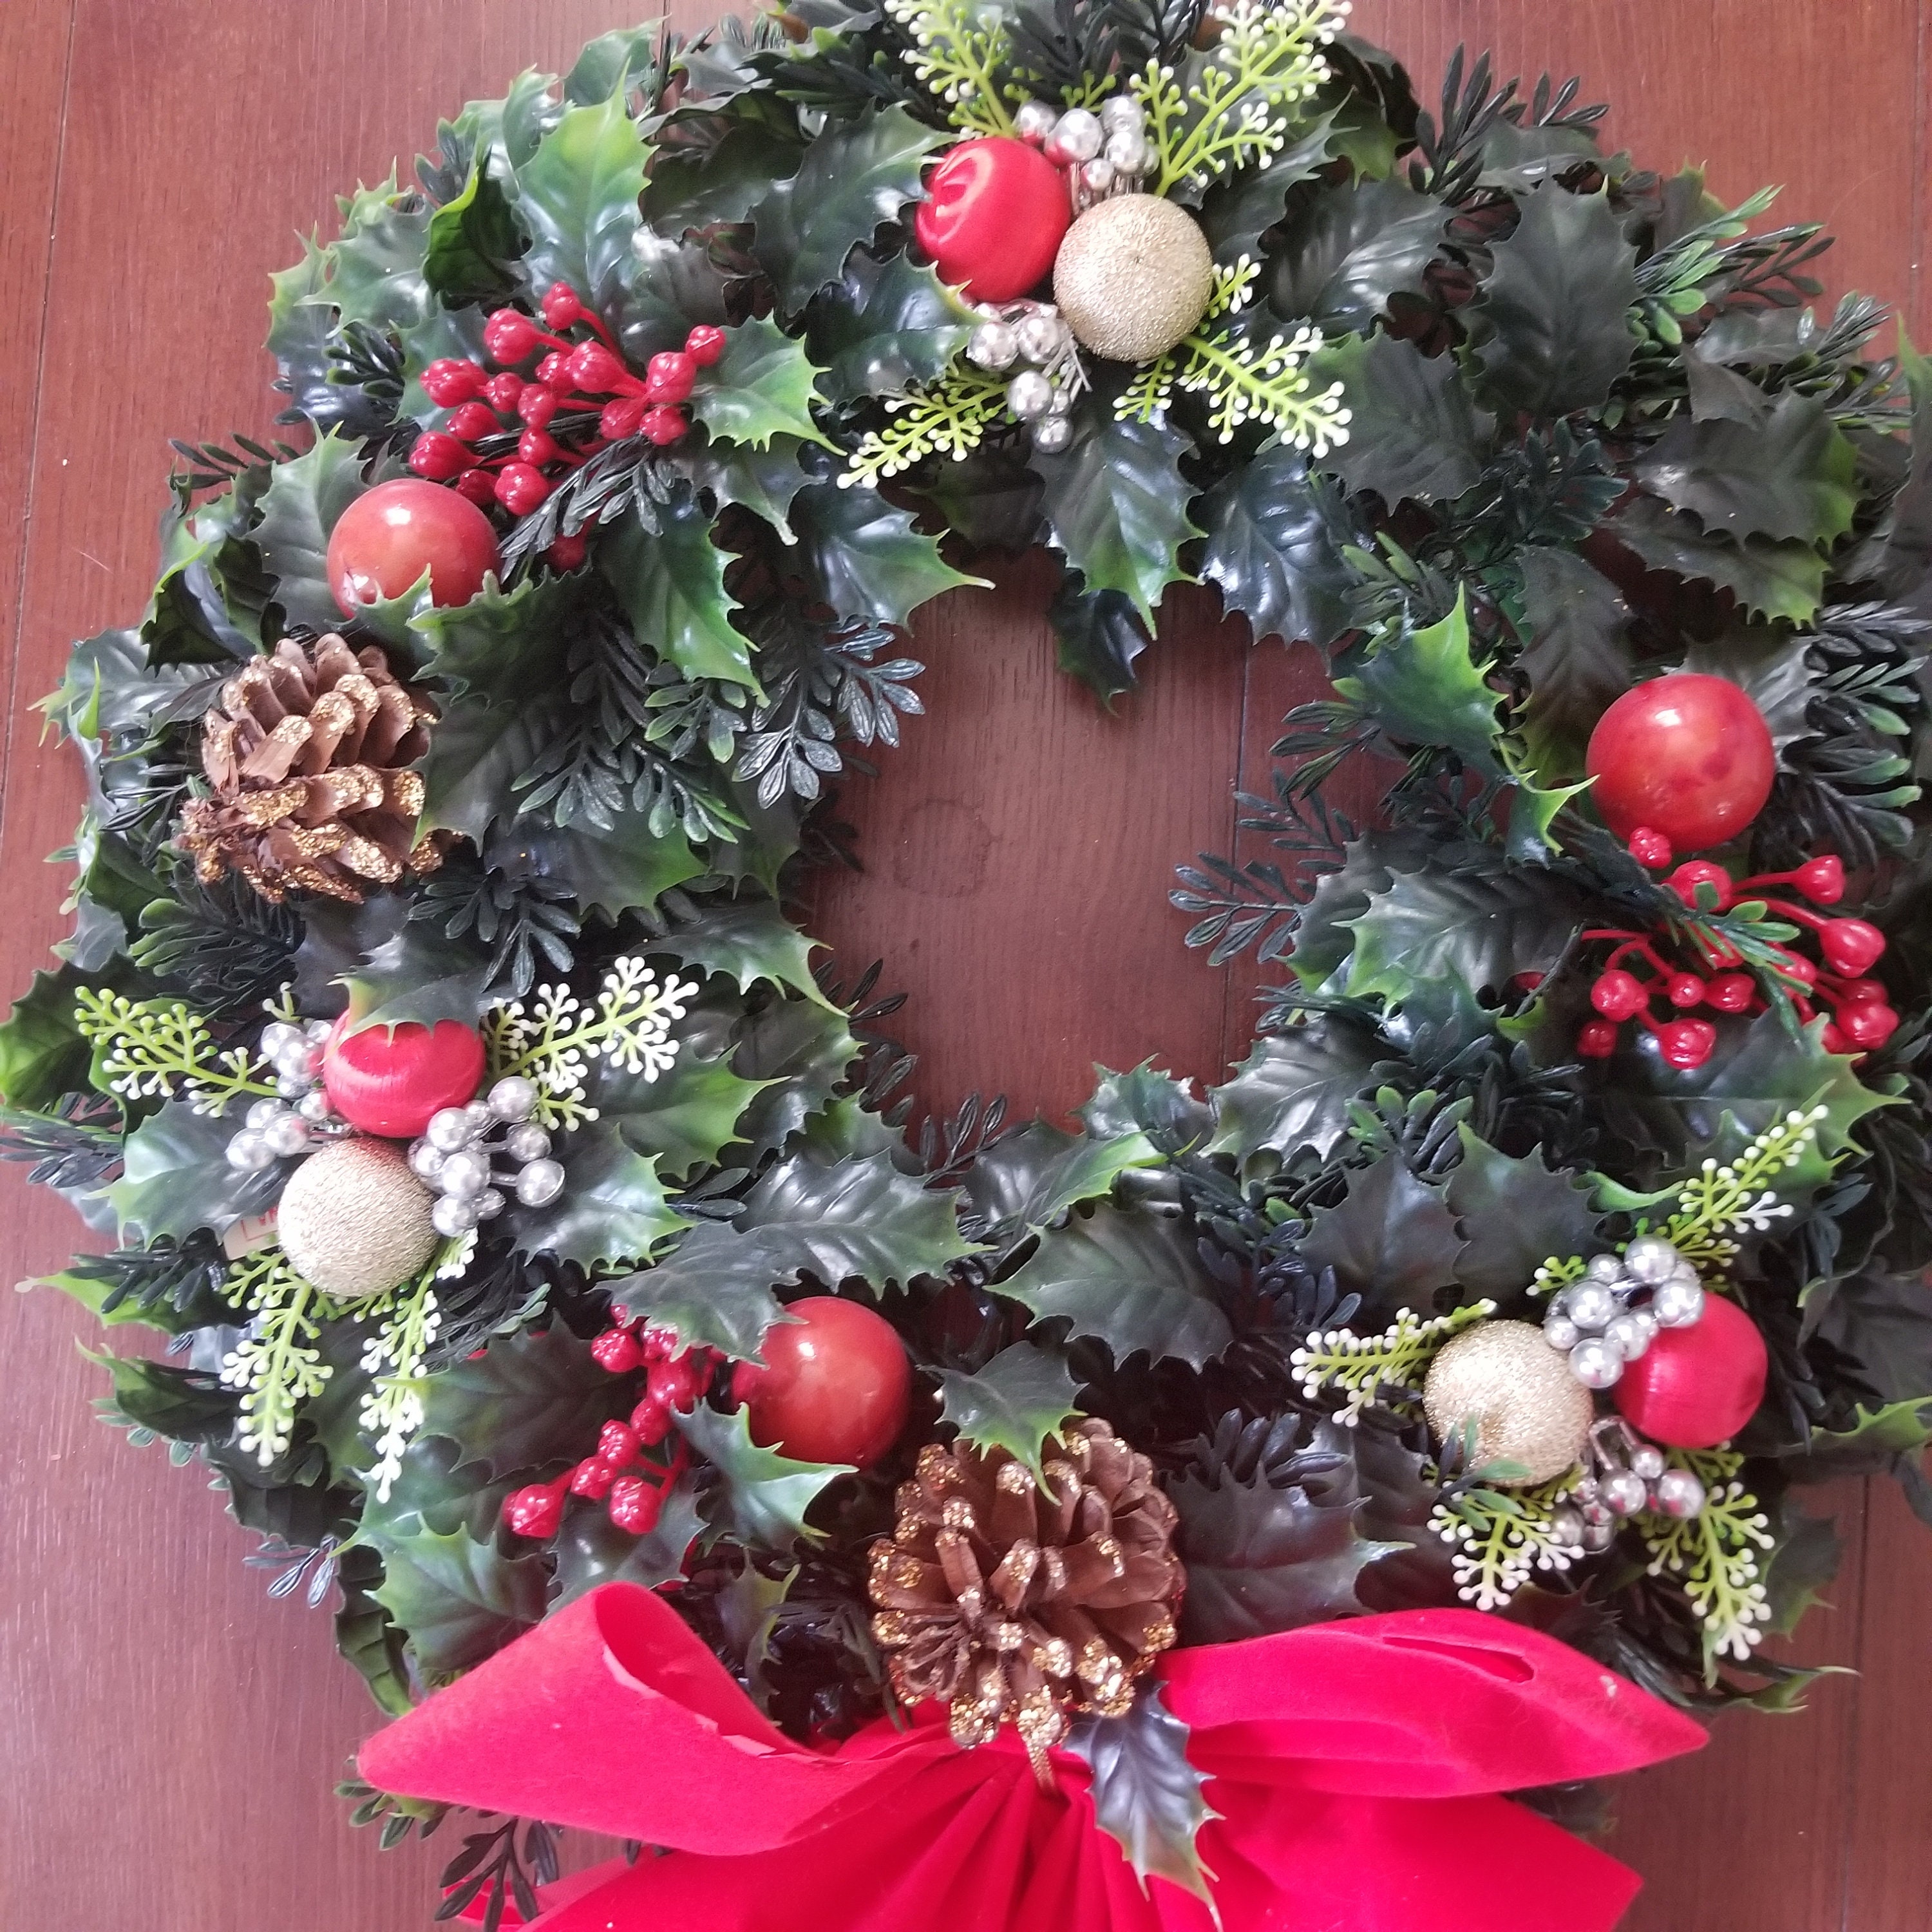 Vintage 1970s Plastic Christmas Greenery and Decorations Perfect for  Creating Vintage Christmas Arrangements Includes a Wreath, Picks 